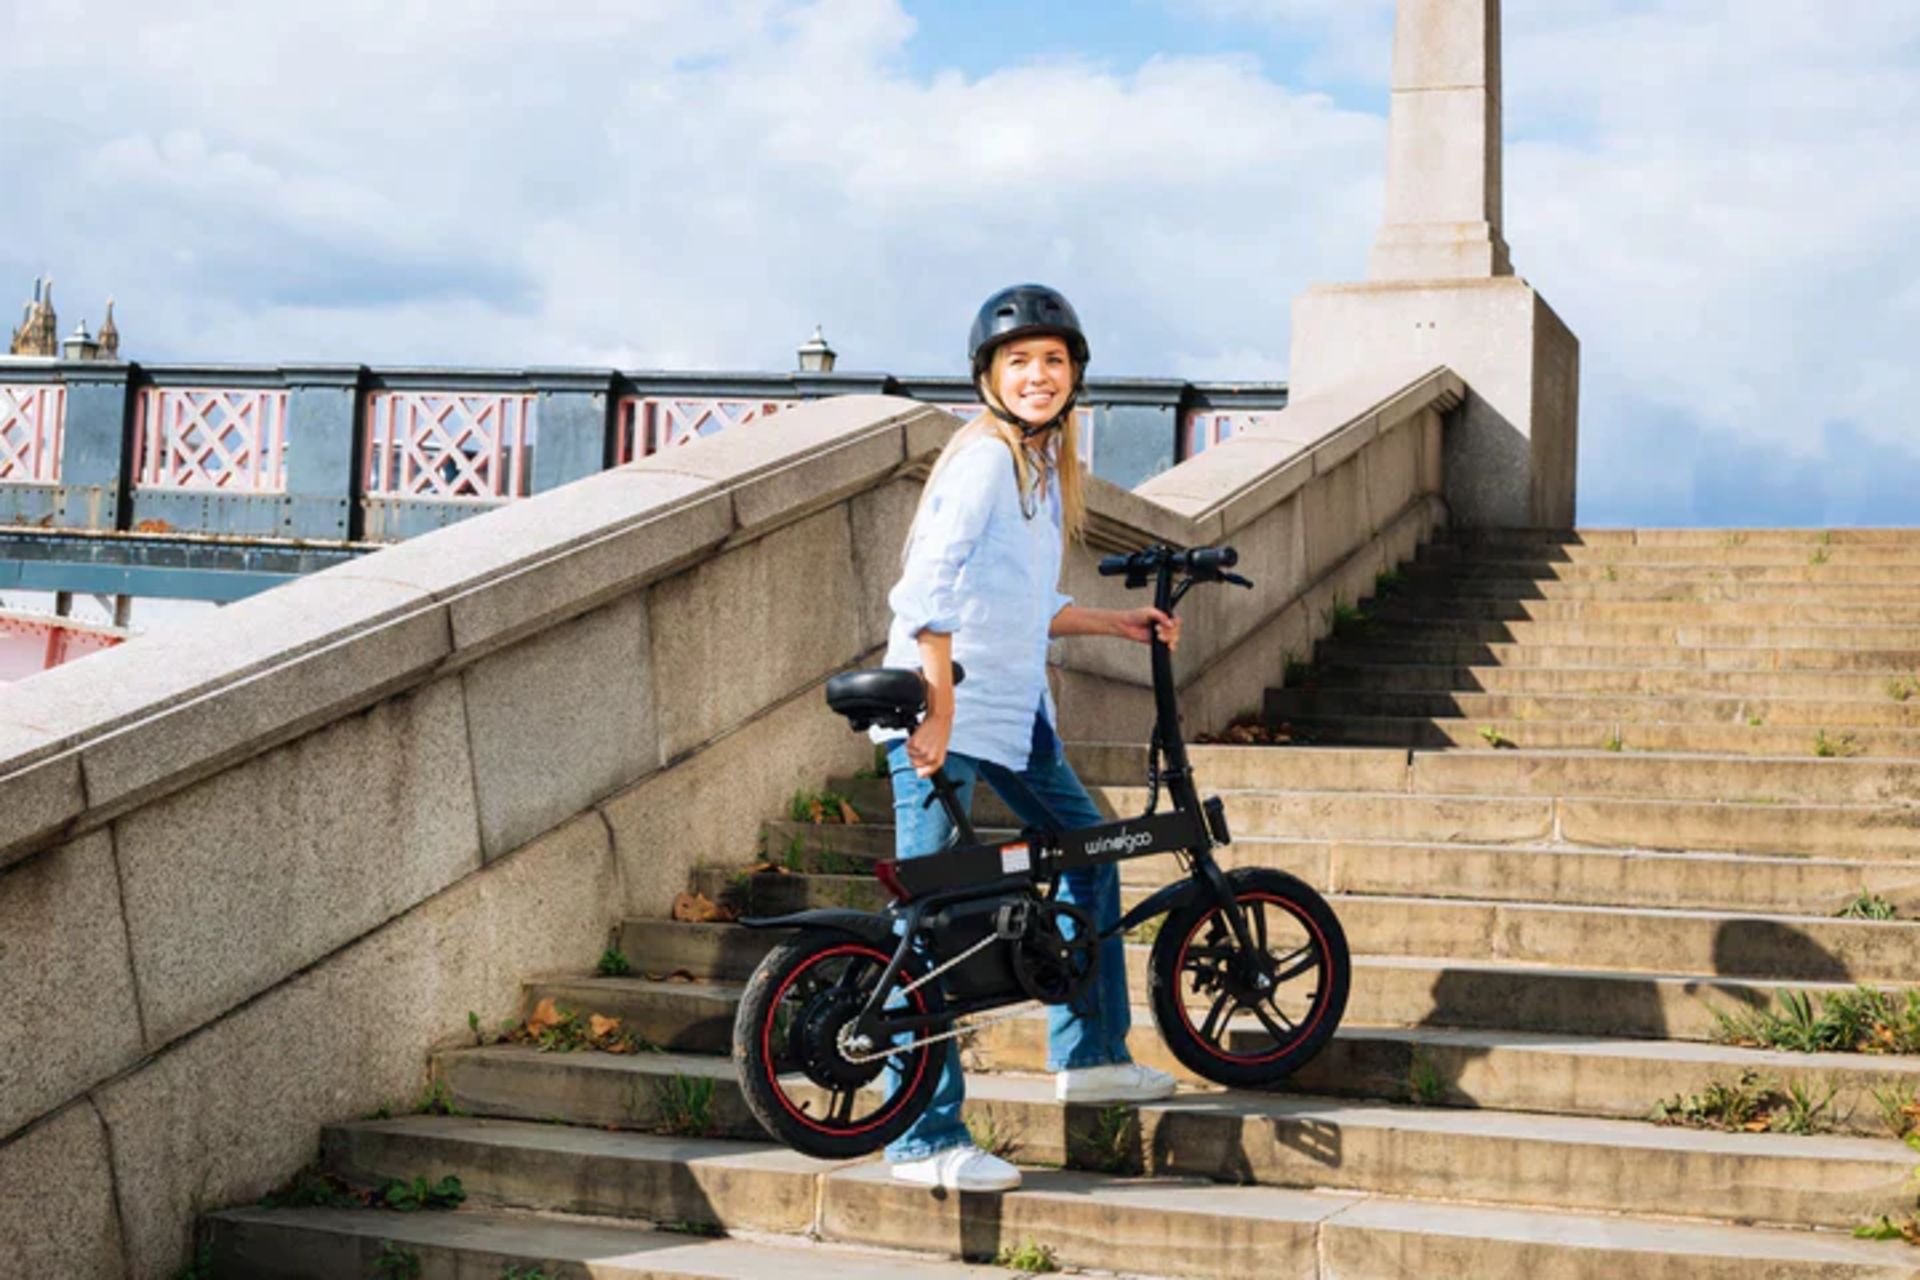 Windgoo B20 Pro Electric Bike. RRP £1,100.99. With 16-inch-wide tires and a frame of upgraded - Image 7 of 7